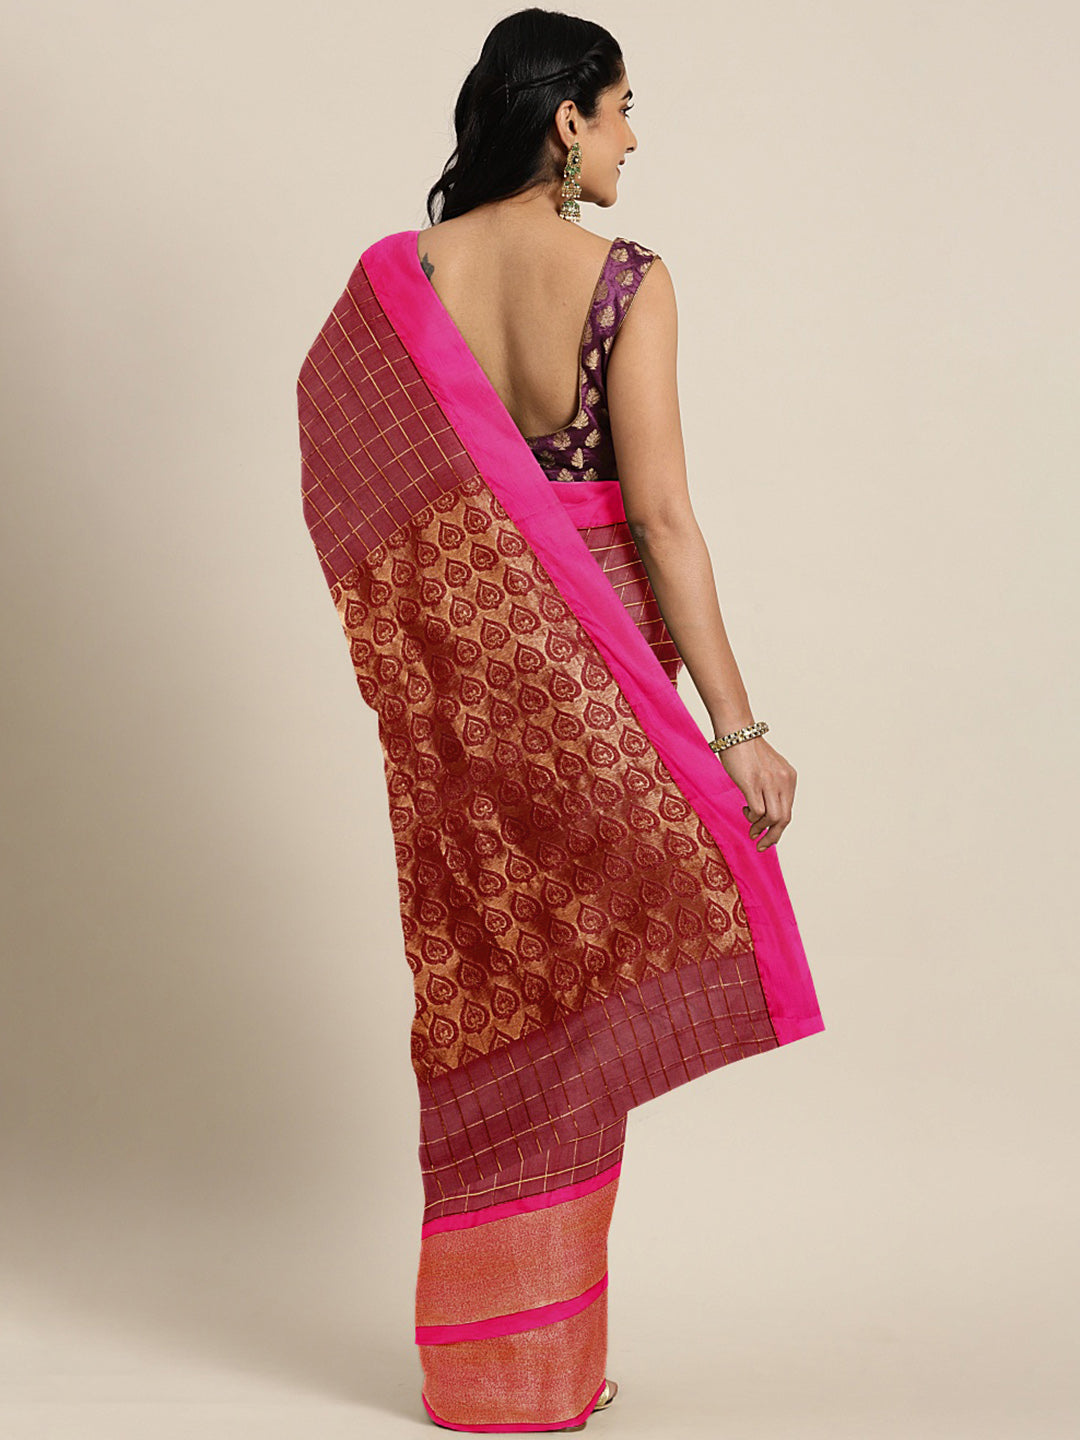 Kalakari India Upppada Cotton Woven Saree With Blouse SKHSSA0010-Saree-Kalakari India-SKHSSA0010-Bollywood, Geographical Indication, Hand Crafted, Heritage Prints, Natural Dyes, Sarees, South Silk, Sustainable Fabrics, Uppada Silk, Woven-[Linen,Ethnic,wear,Fashionista,Handloom,Handicraft,Indigo,blockprint,block,print,Cotton,Chanderi,Blue, latest,classy,party,bollywood,trendy,summer,style,traditional,formal,elegant,unique,style,hand,block,print, dabu,booti,gift,present,glamorous,affordable,collec